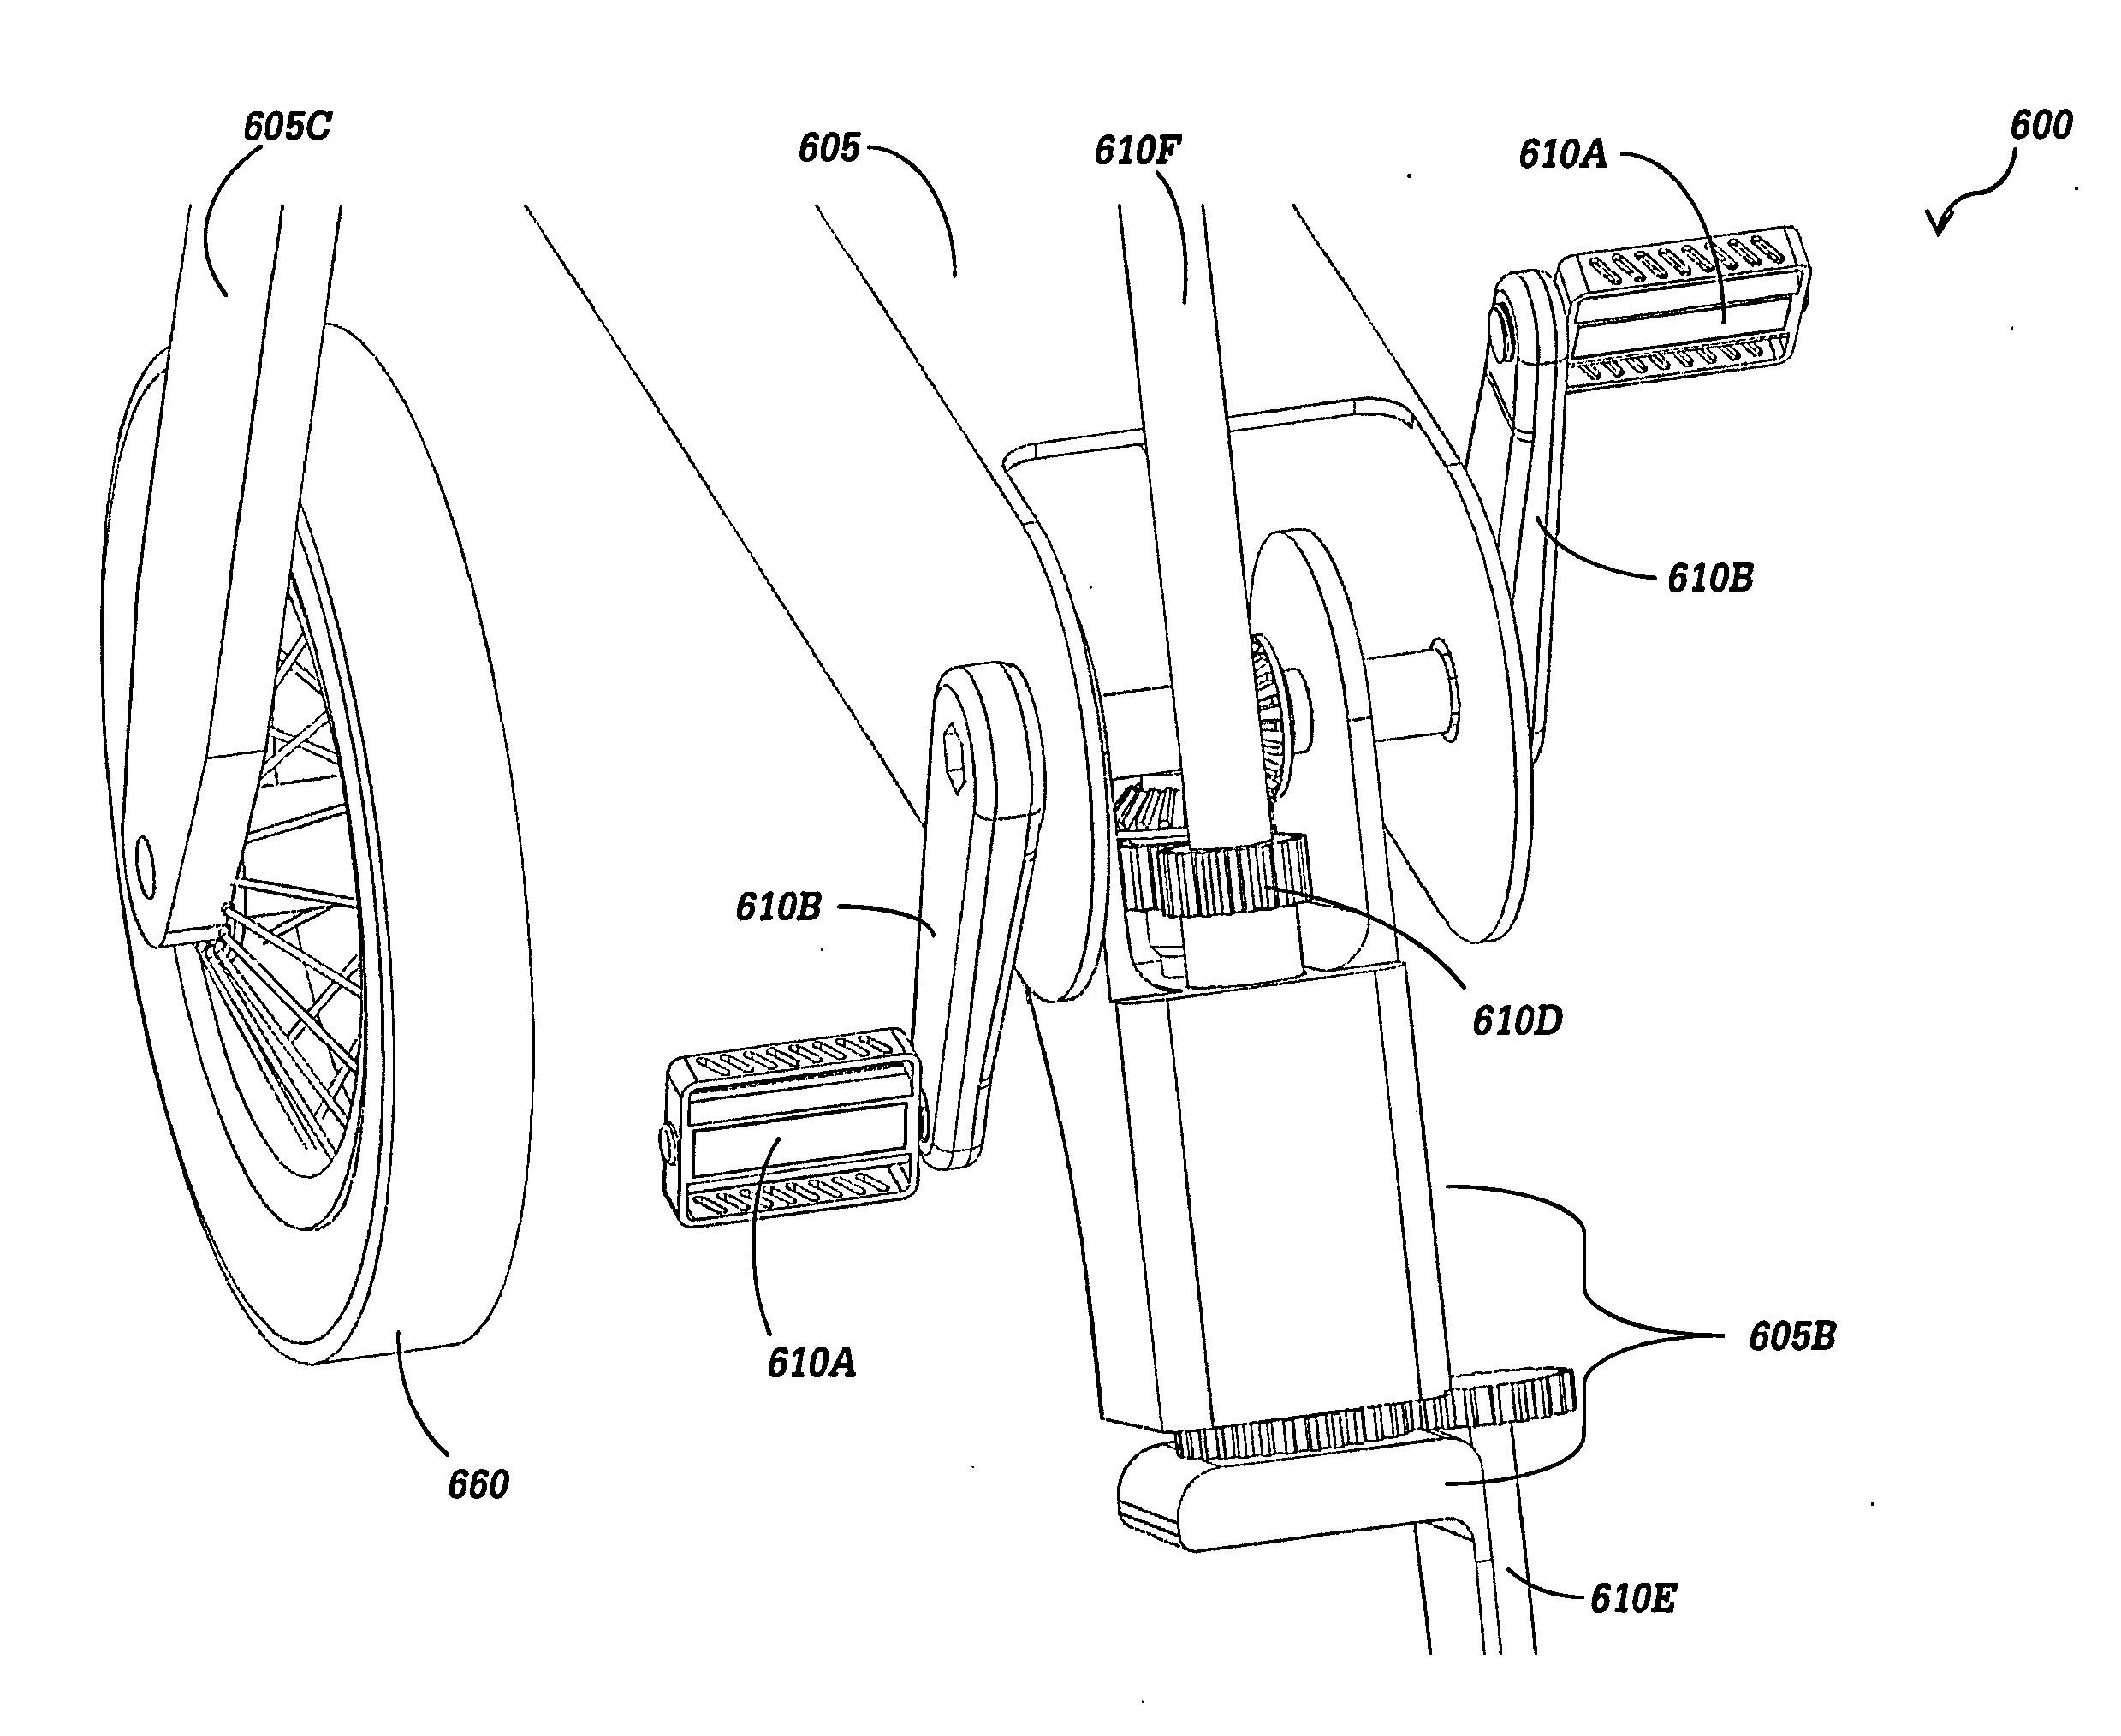 Drive-and-steering mechanisms used in the design of compact, carry-on vehicles